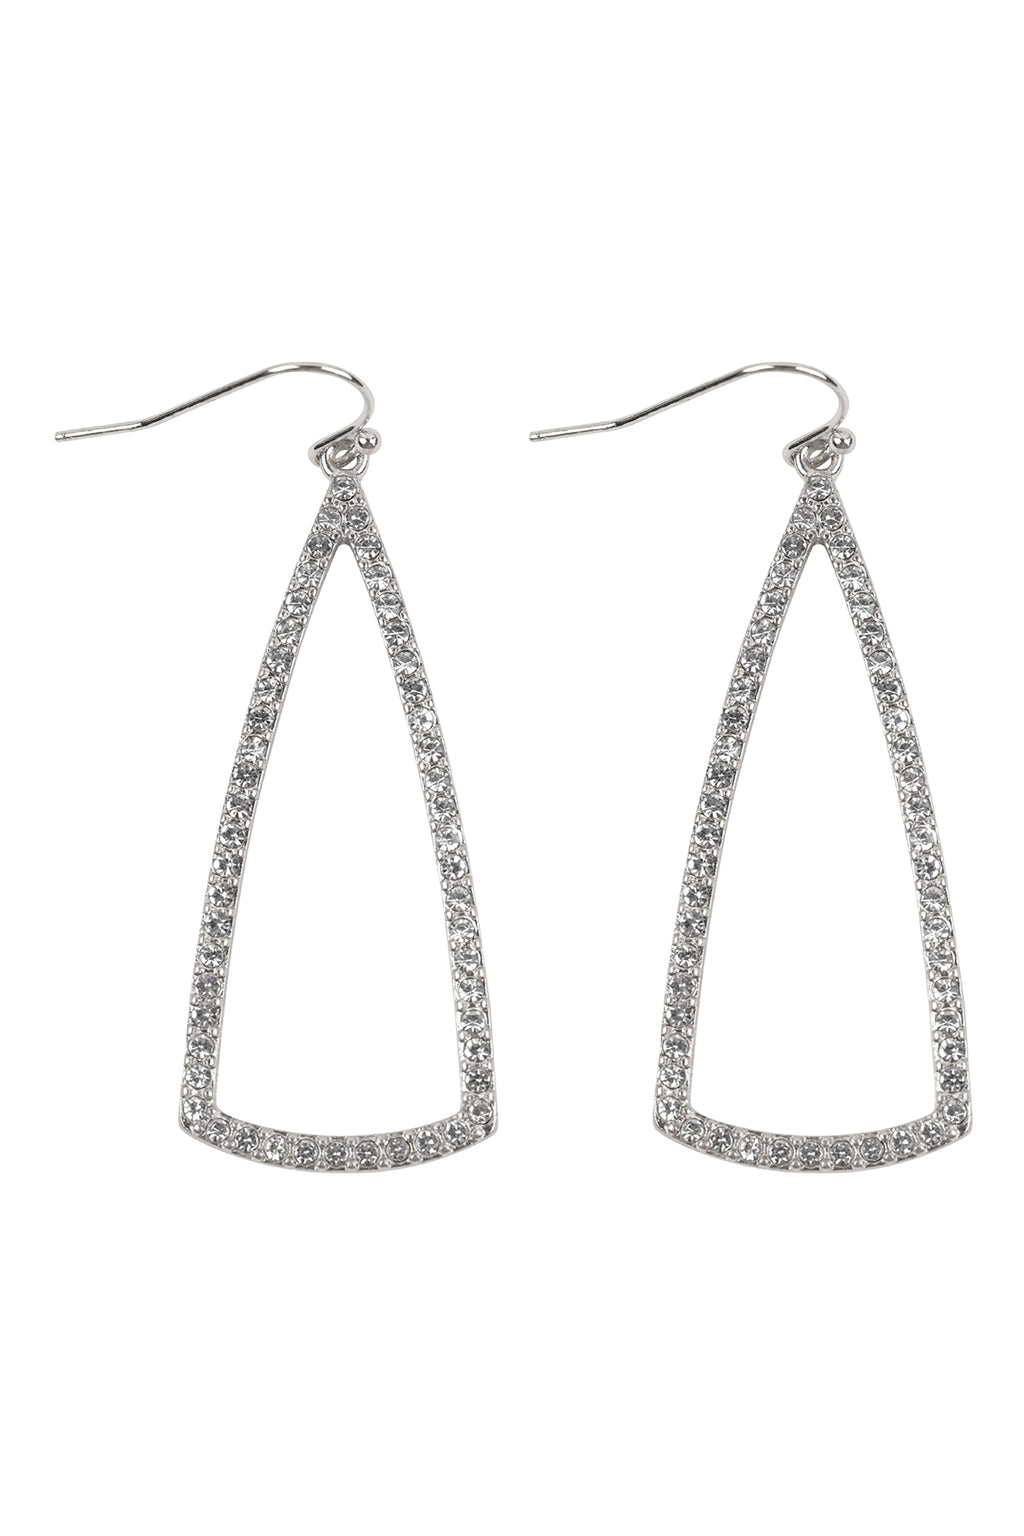 Pave Rhinestone Triangle Hook Earrings Silver - Pack of 6